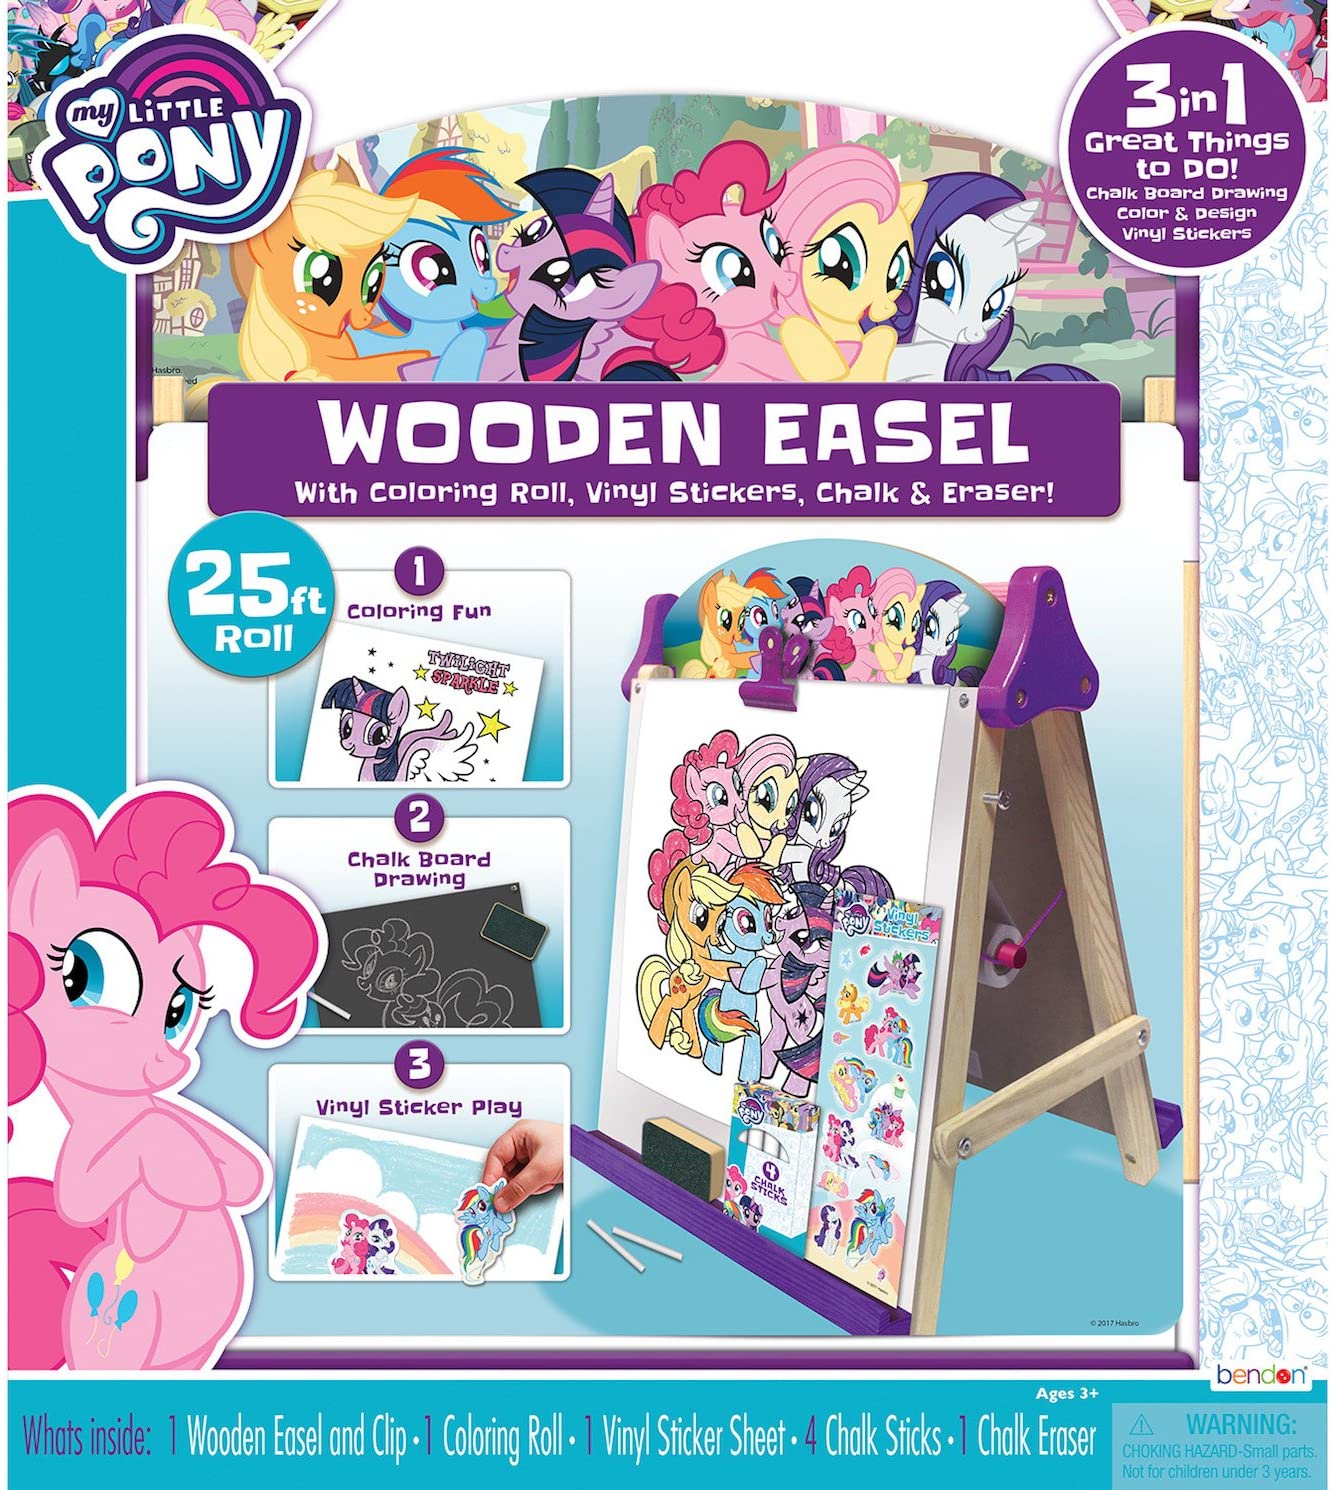 MLP Wooden Easel with 25-Foot Coloring Roll Set 1